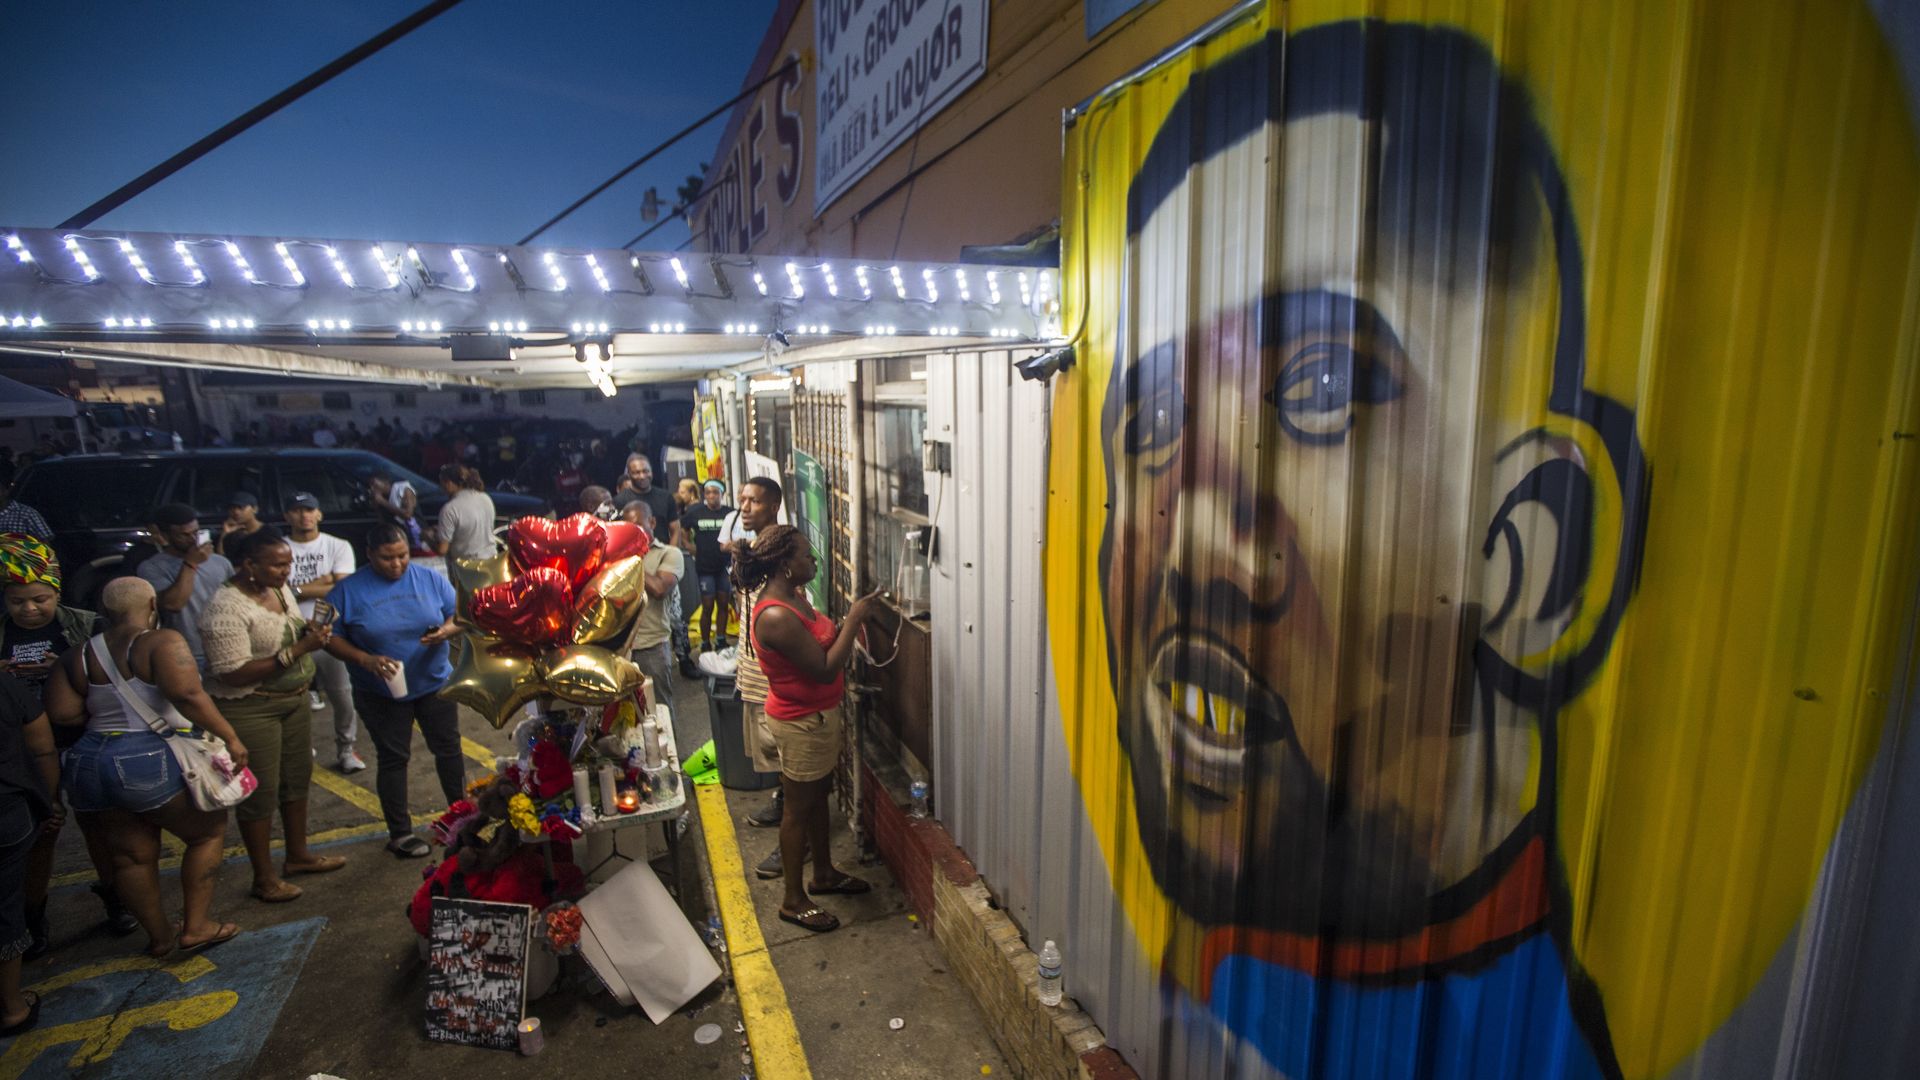 A mural of Alton Sterling.